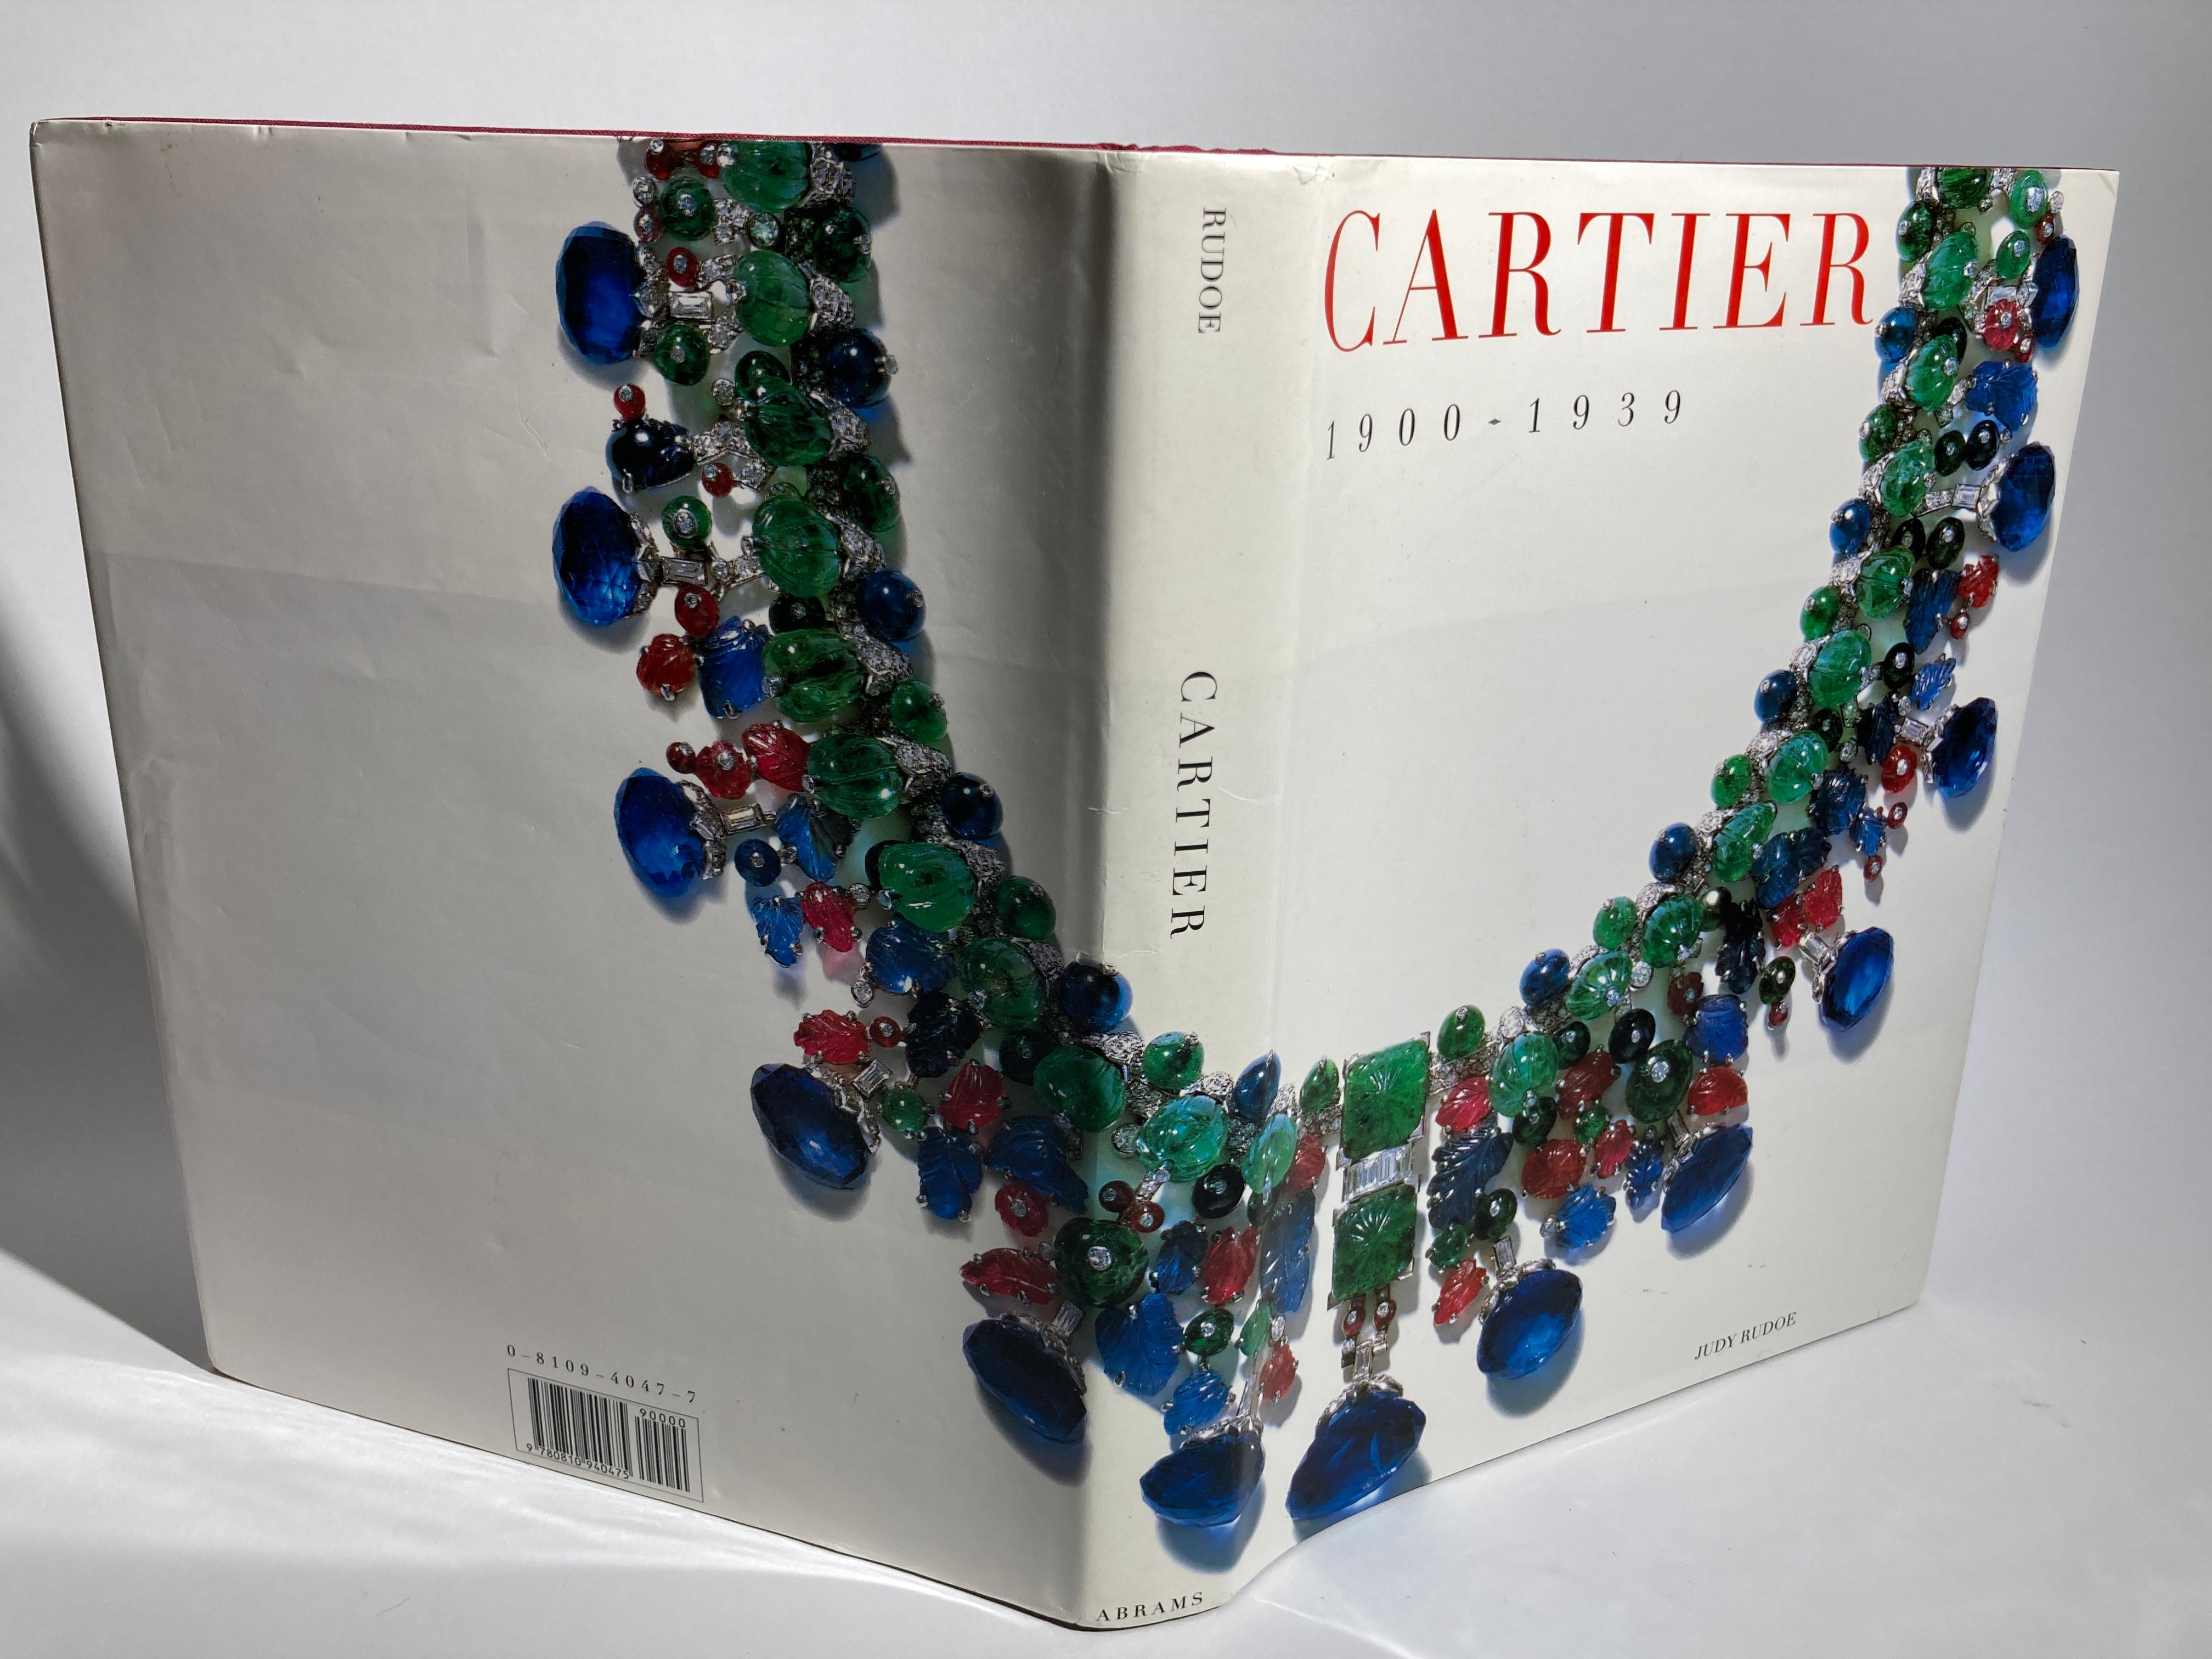 Cartier 1900 to 1939 Hardcover Book 14